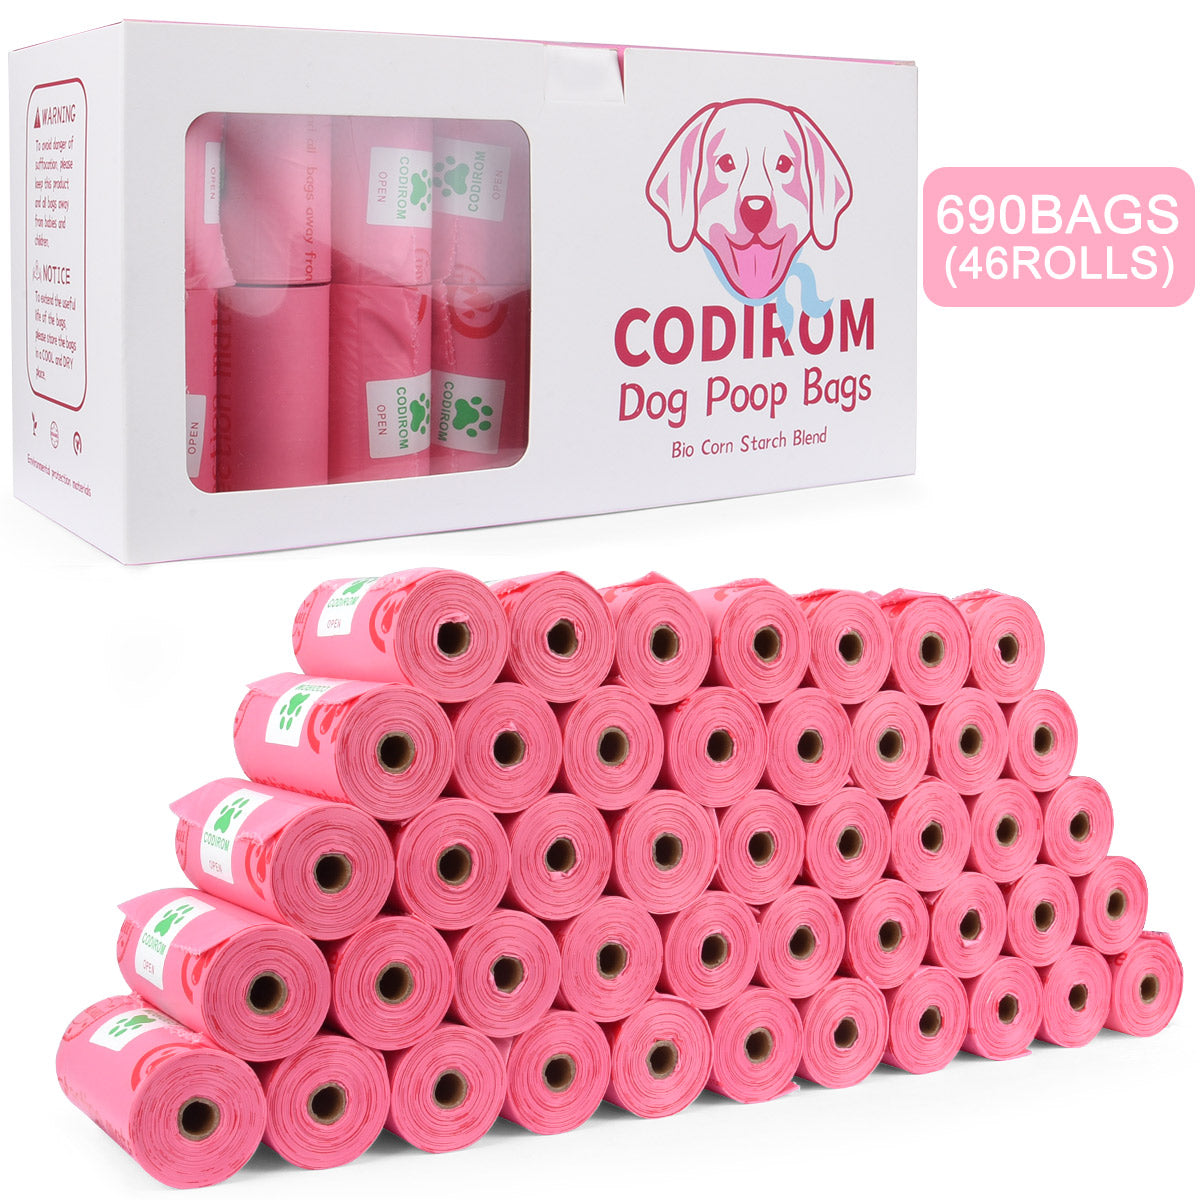 Biodegradable Eco-Friendly Dog Poop Bags 690 Counts 46 Rolls-PINK